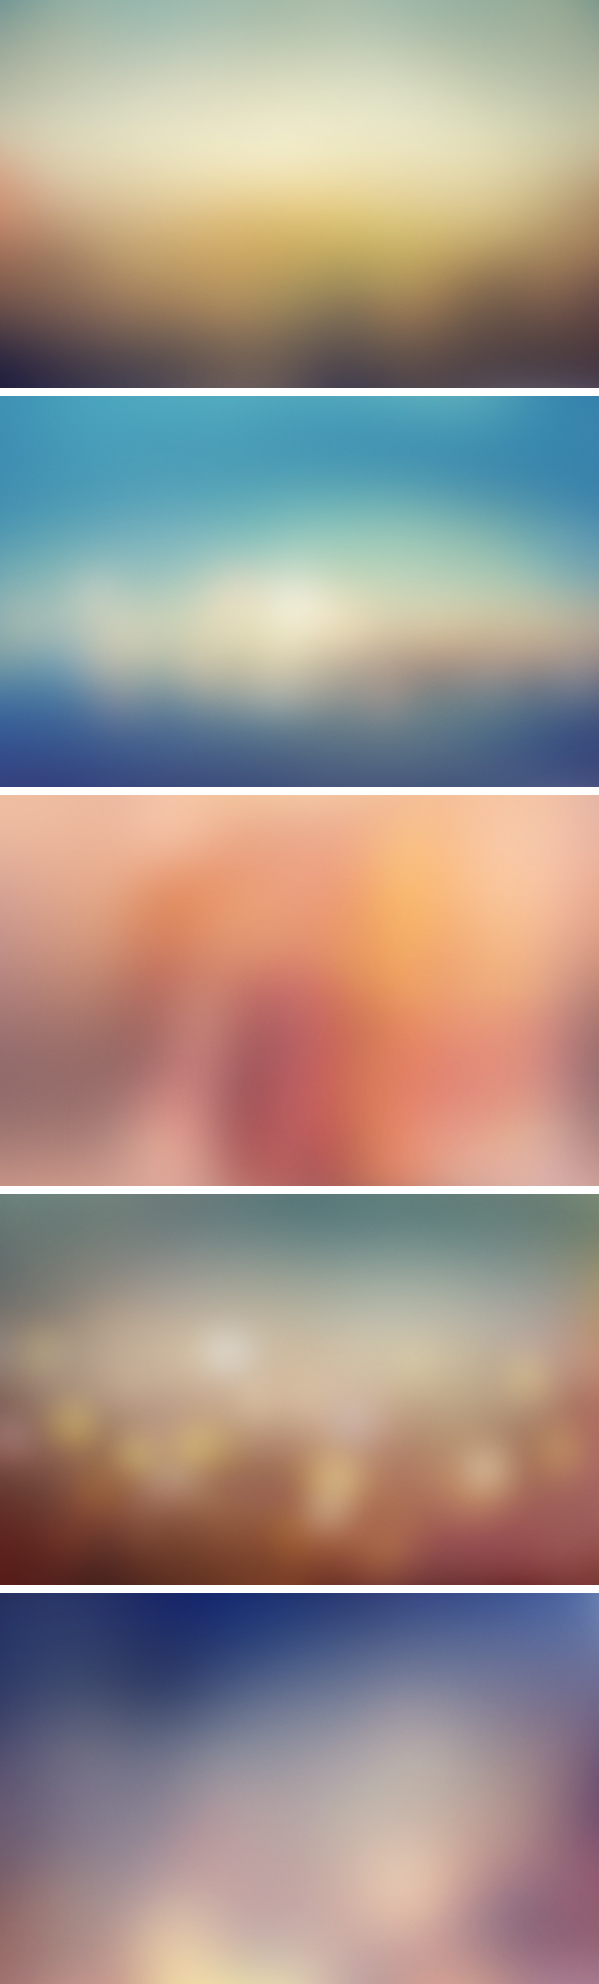 5 Blurred Backgrounds Vol.1 | GraphicBurger